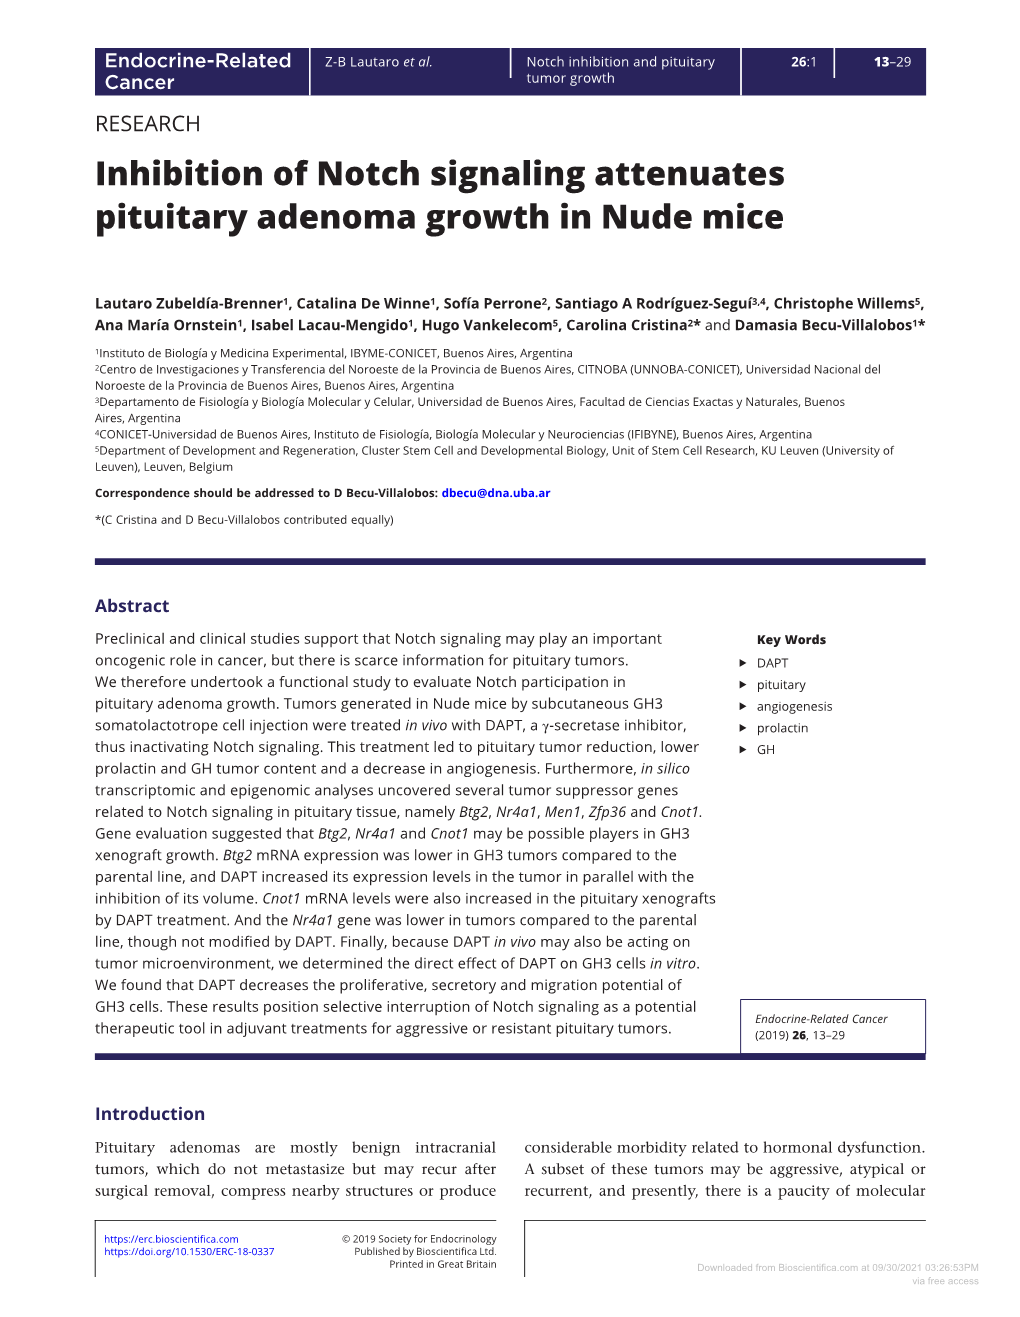 Inhibition of Notch Signaling Attenuates Pituitary Adenoma Growth in Nude Mice